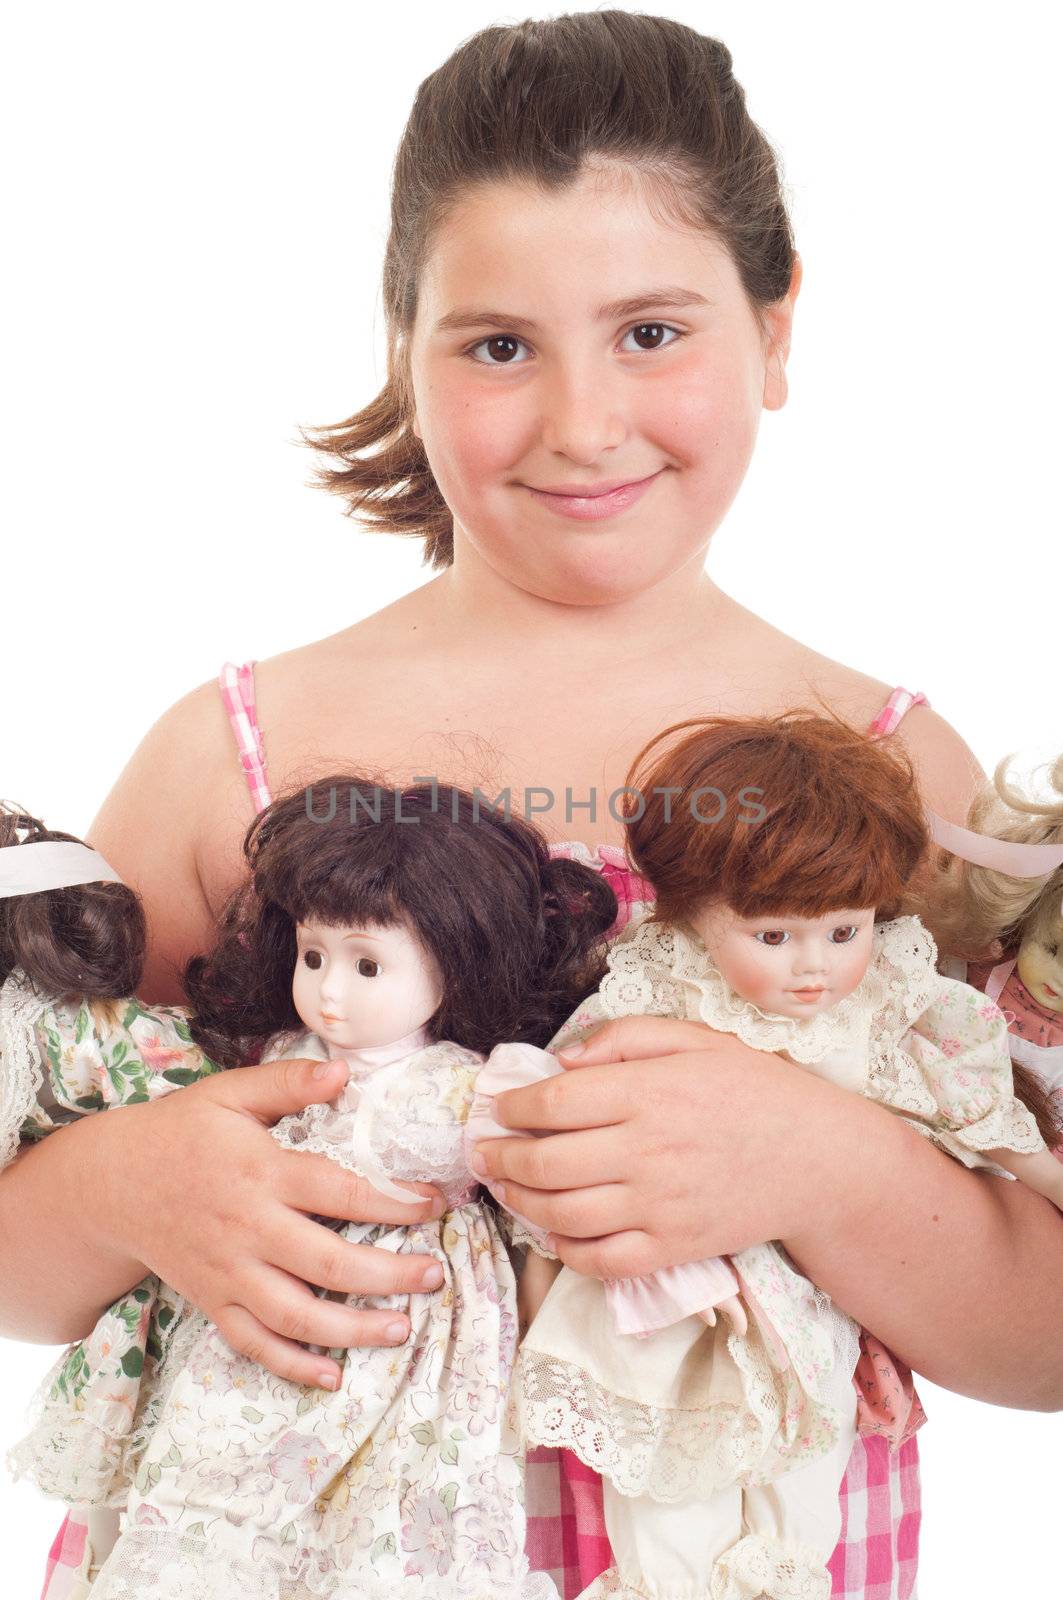 Little girl with dolls by luissantos84